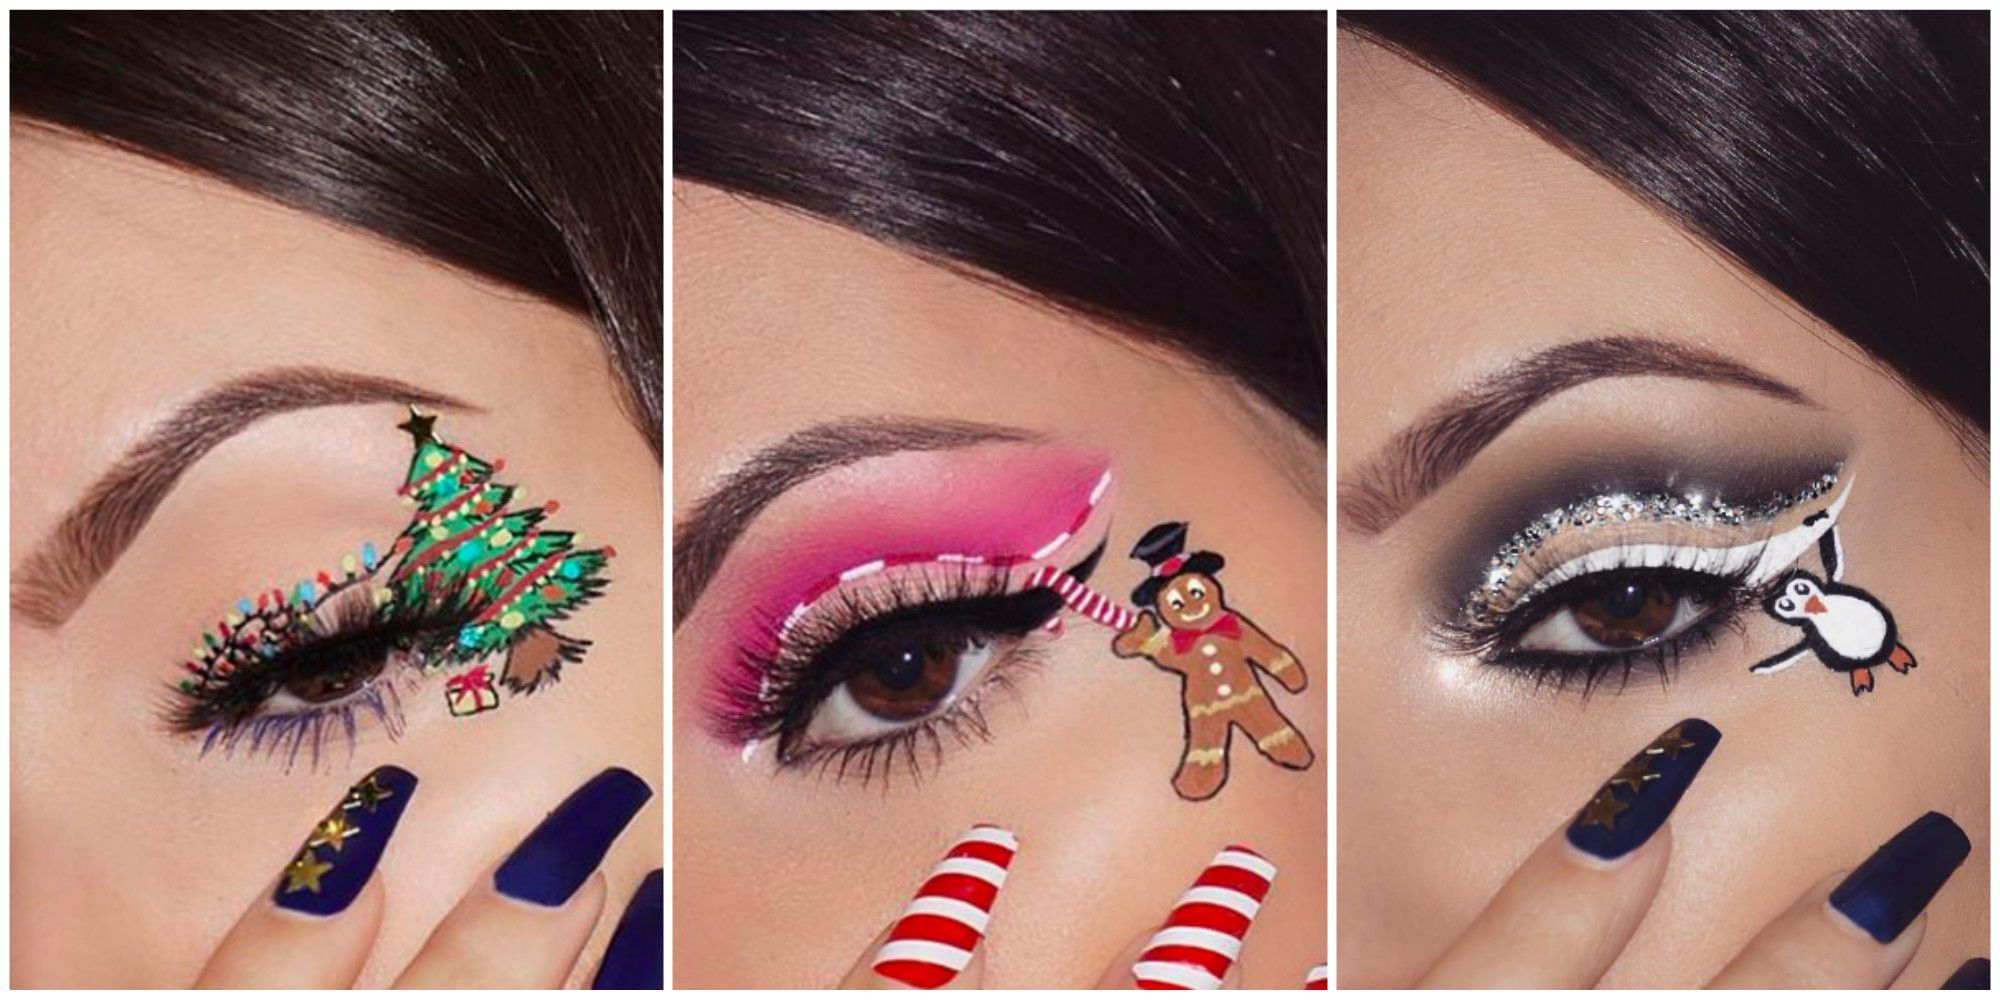 Unique Eye Makeup Ideas These Festive Makeup Looks Are The Most Magical Thing Youll See